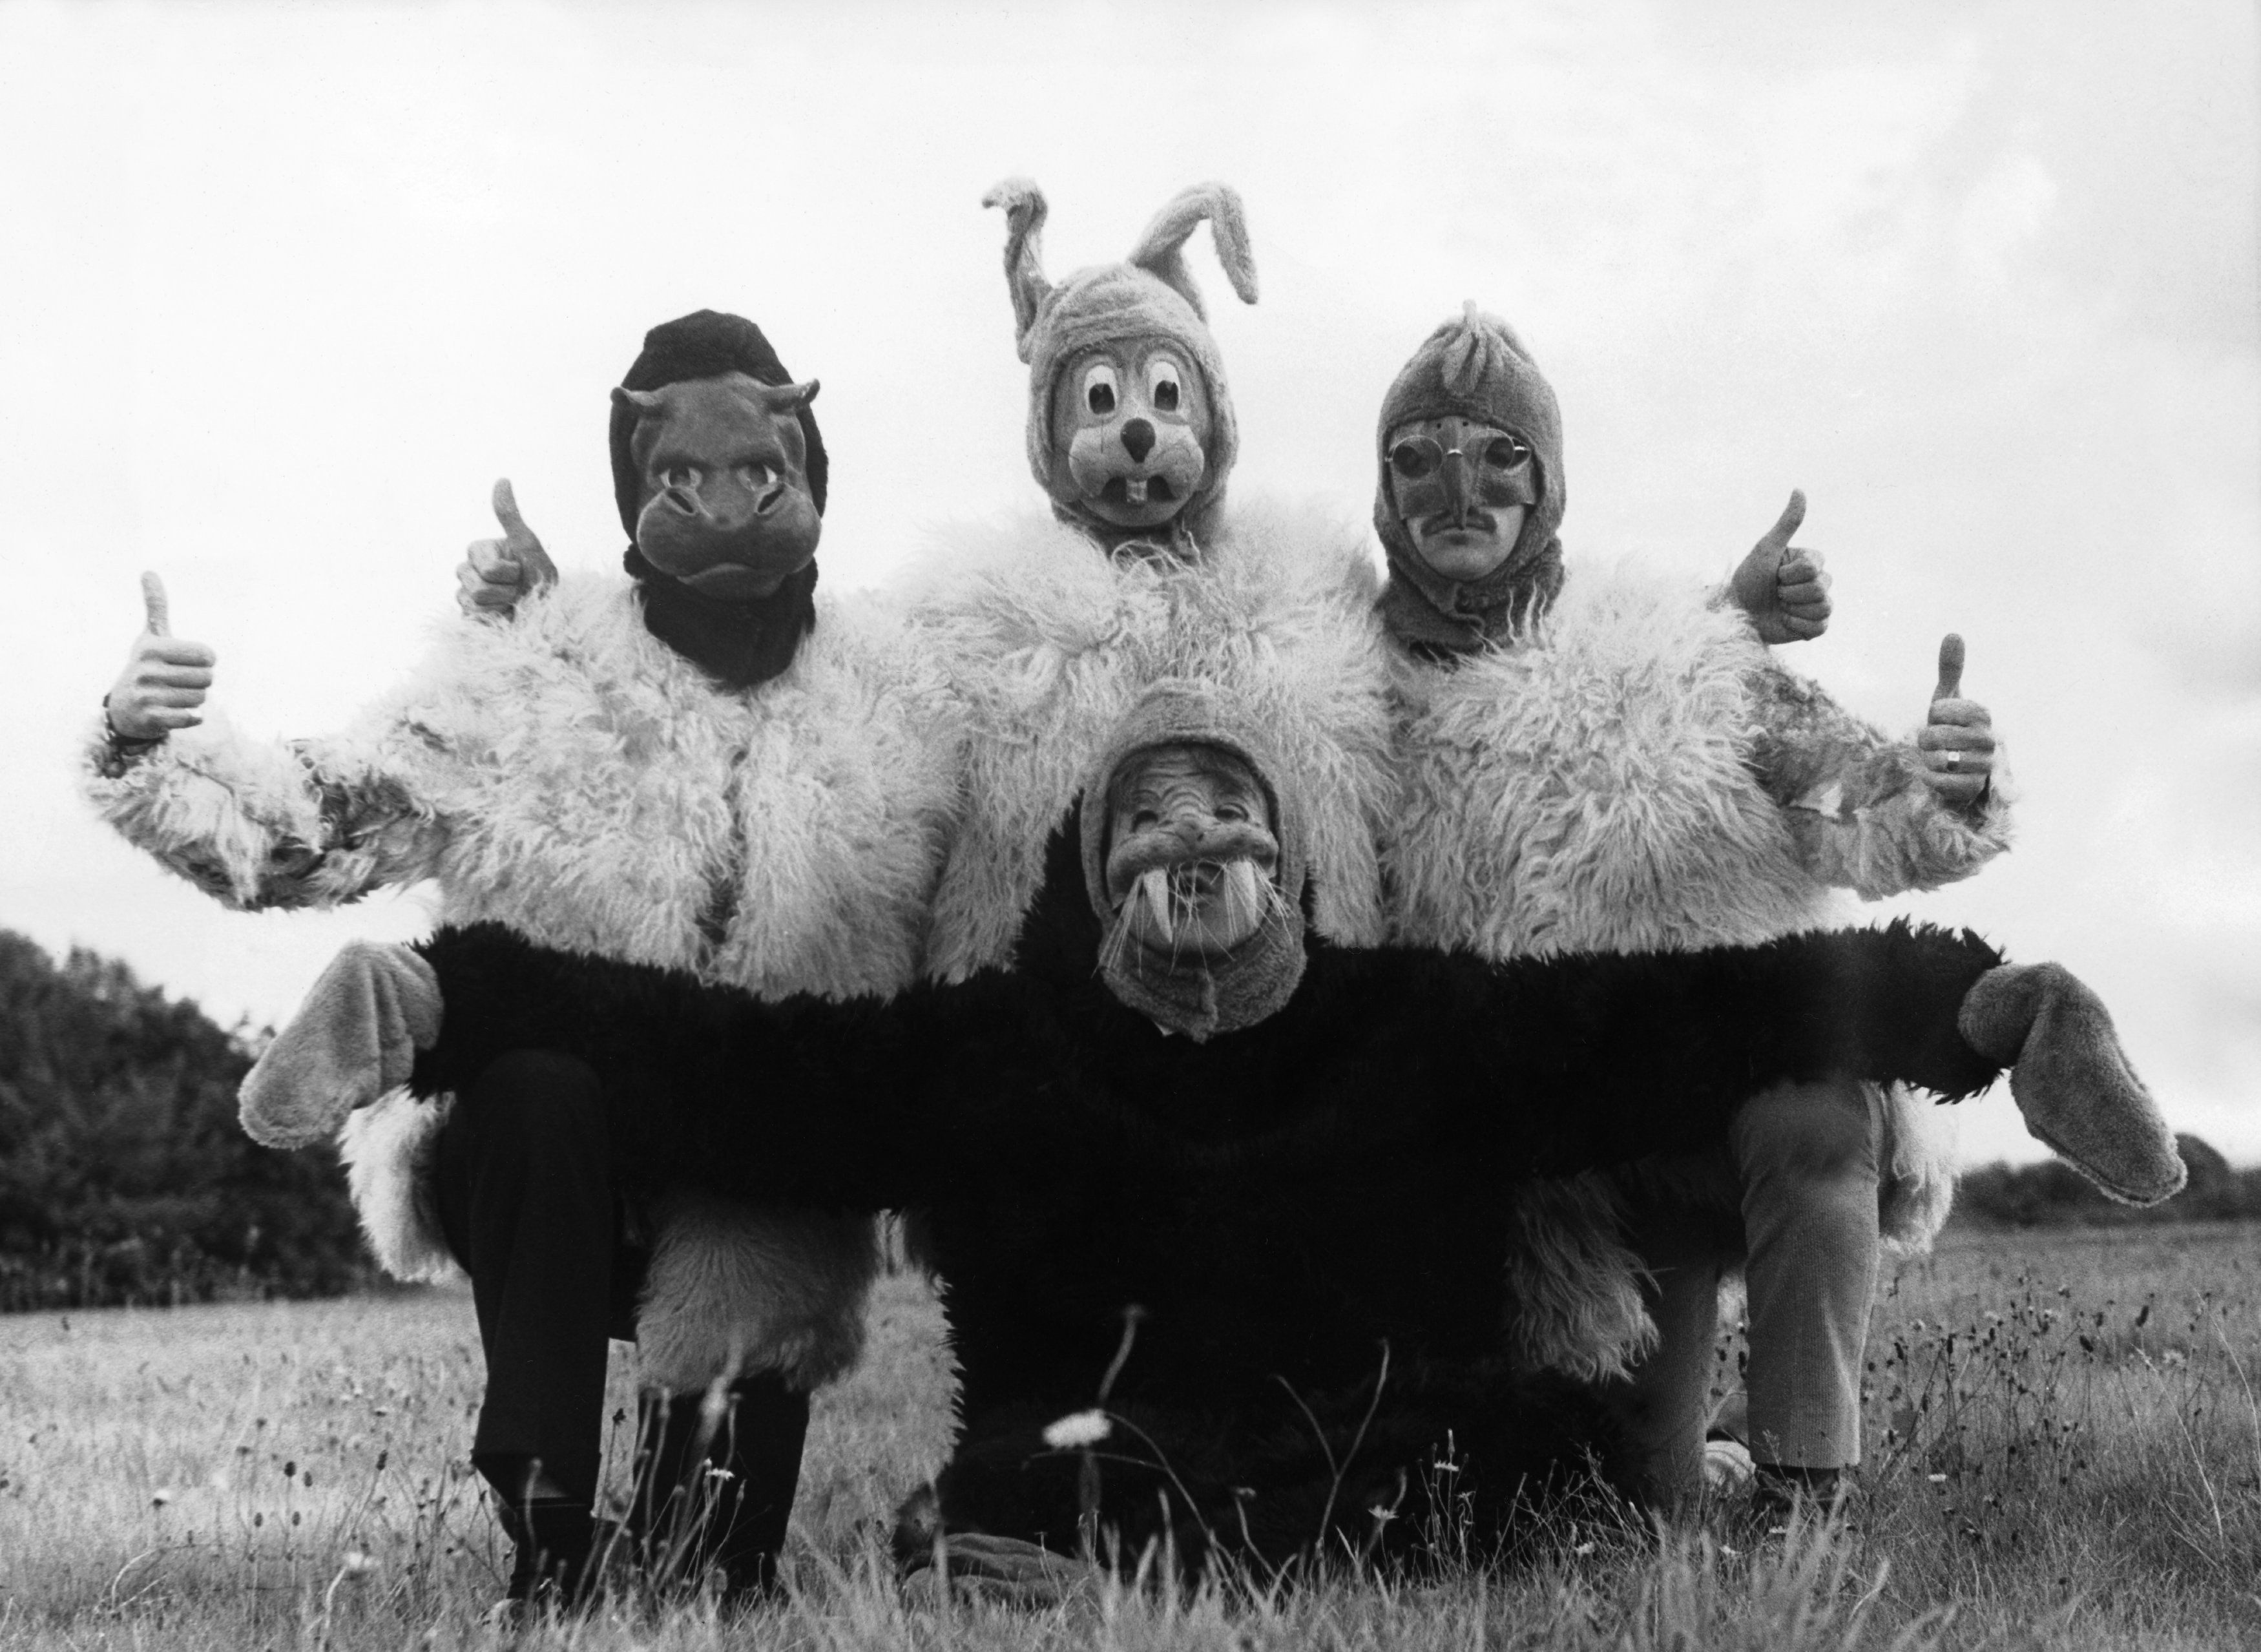 The Beatles in the animal costumes they wore while performing "I Am the Walrus" in 'Magical Mystery Tour'